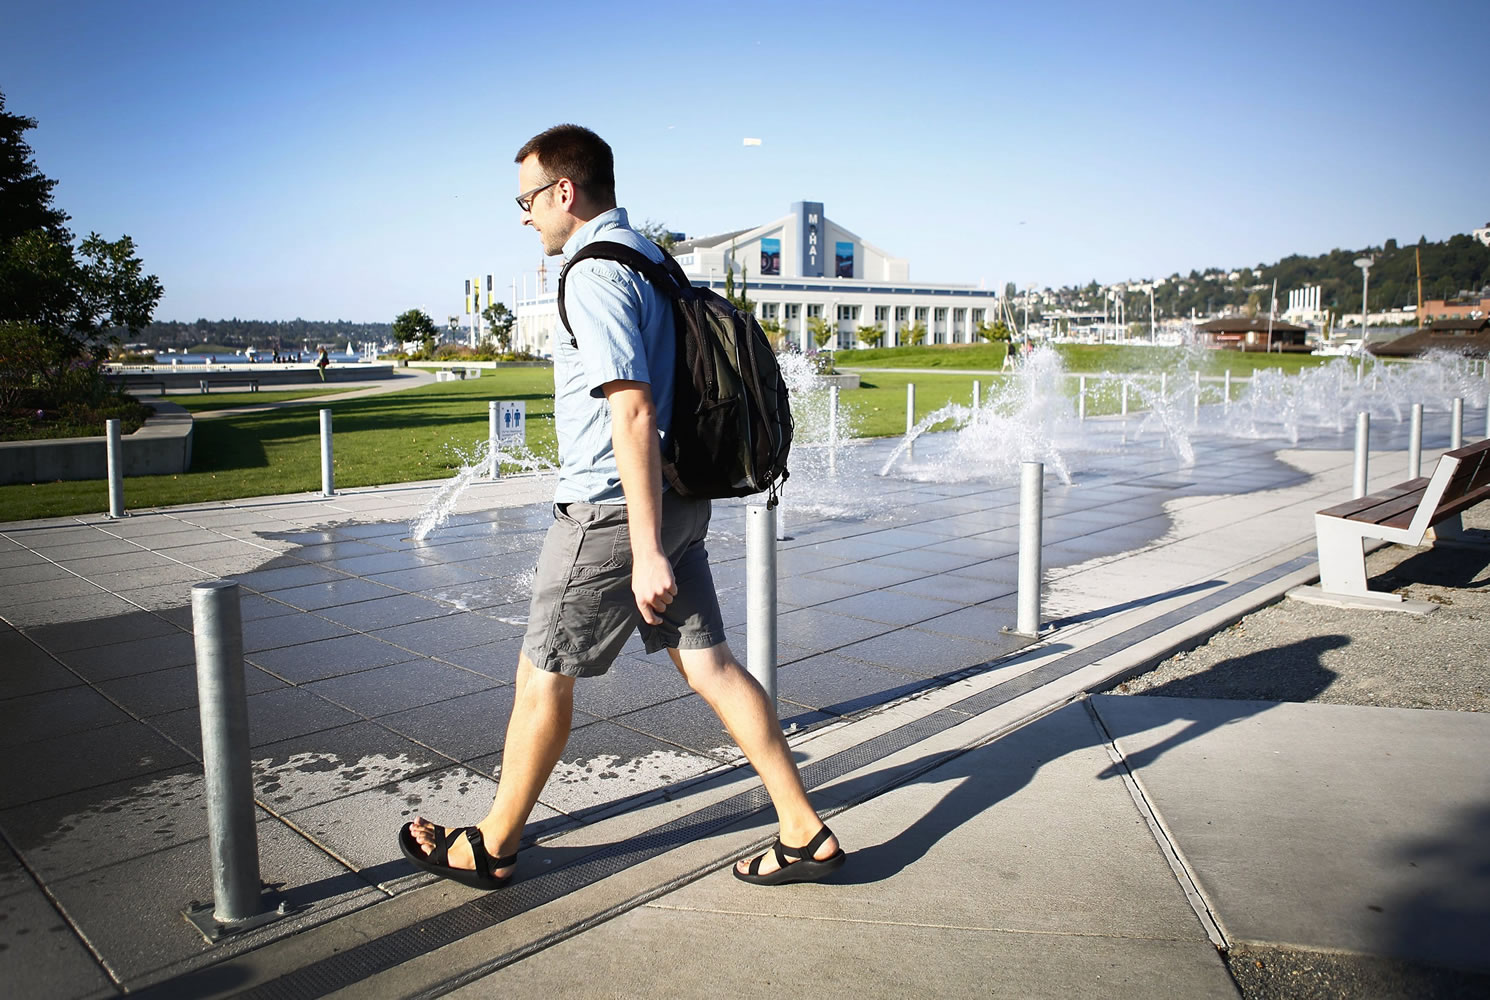 Luke Baylor, an Amazon.com employee, walks past a water feature at Lake Union Park in Seattle on his 3-mile commute home.